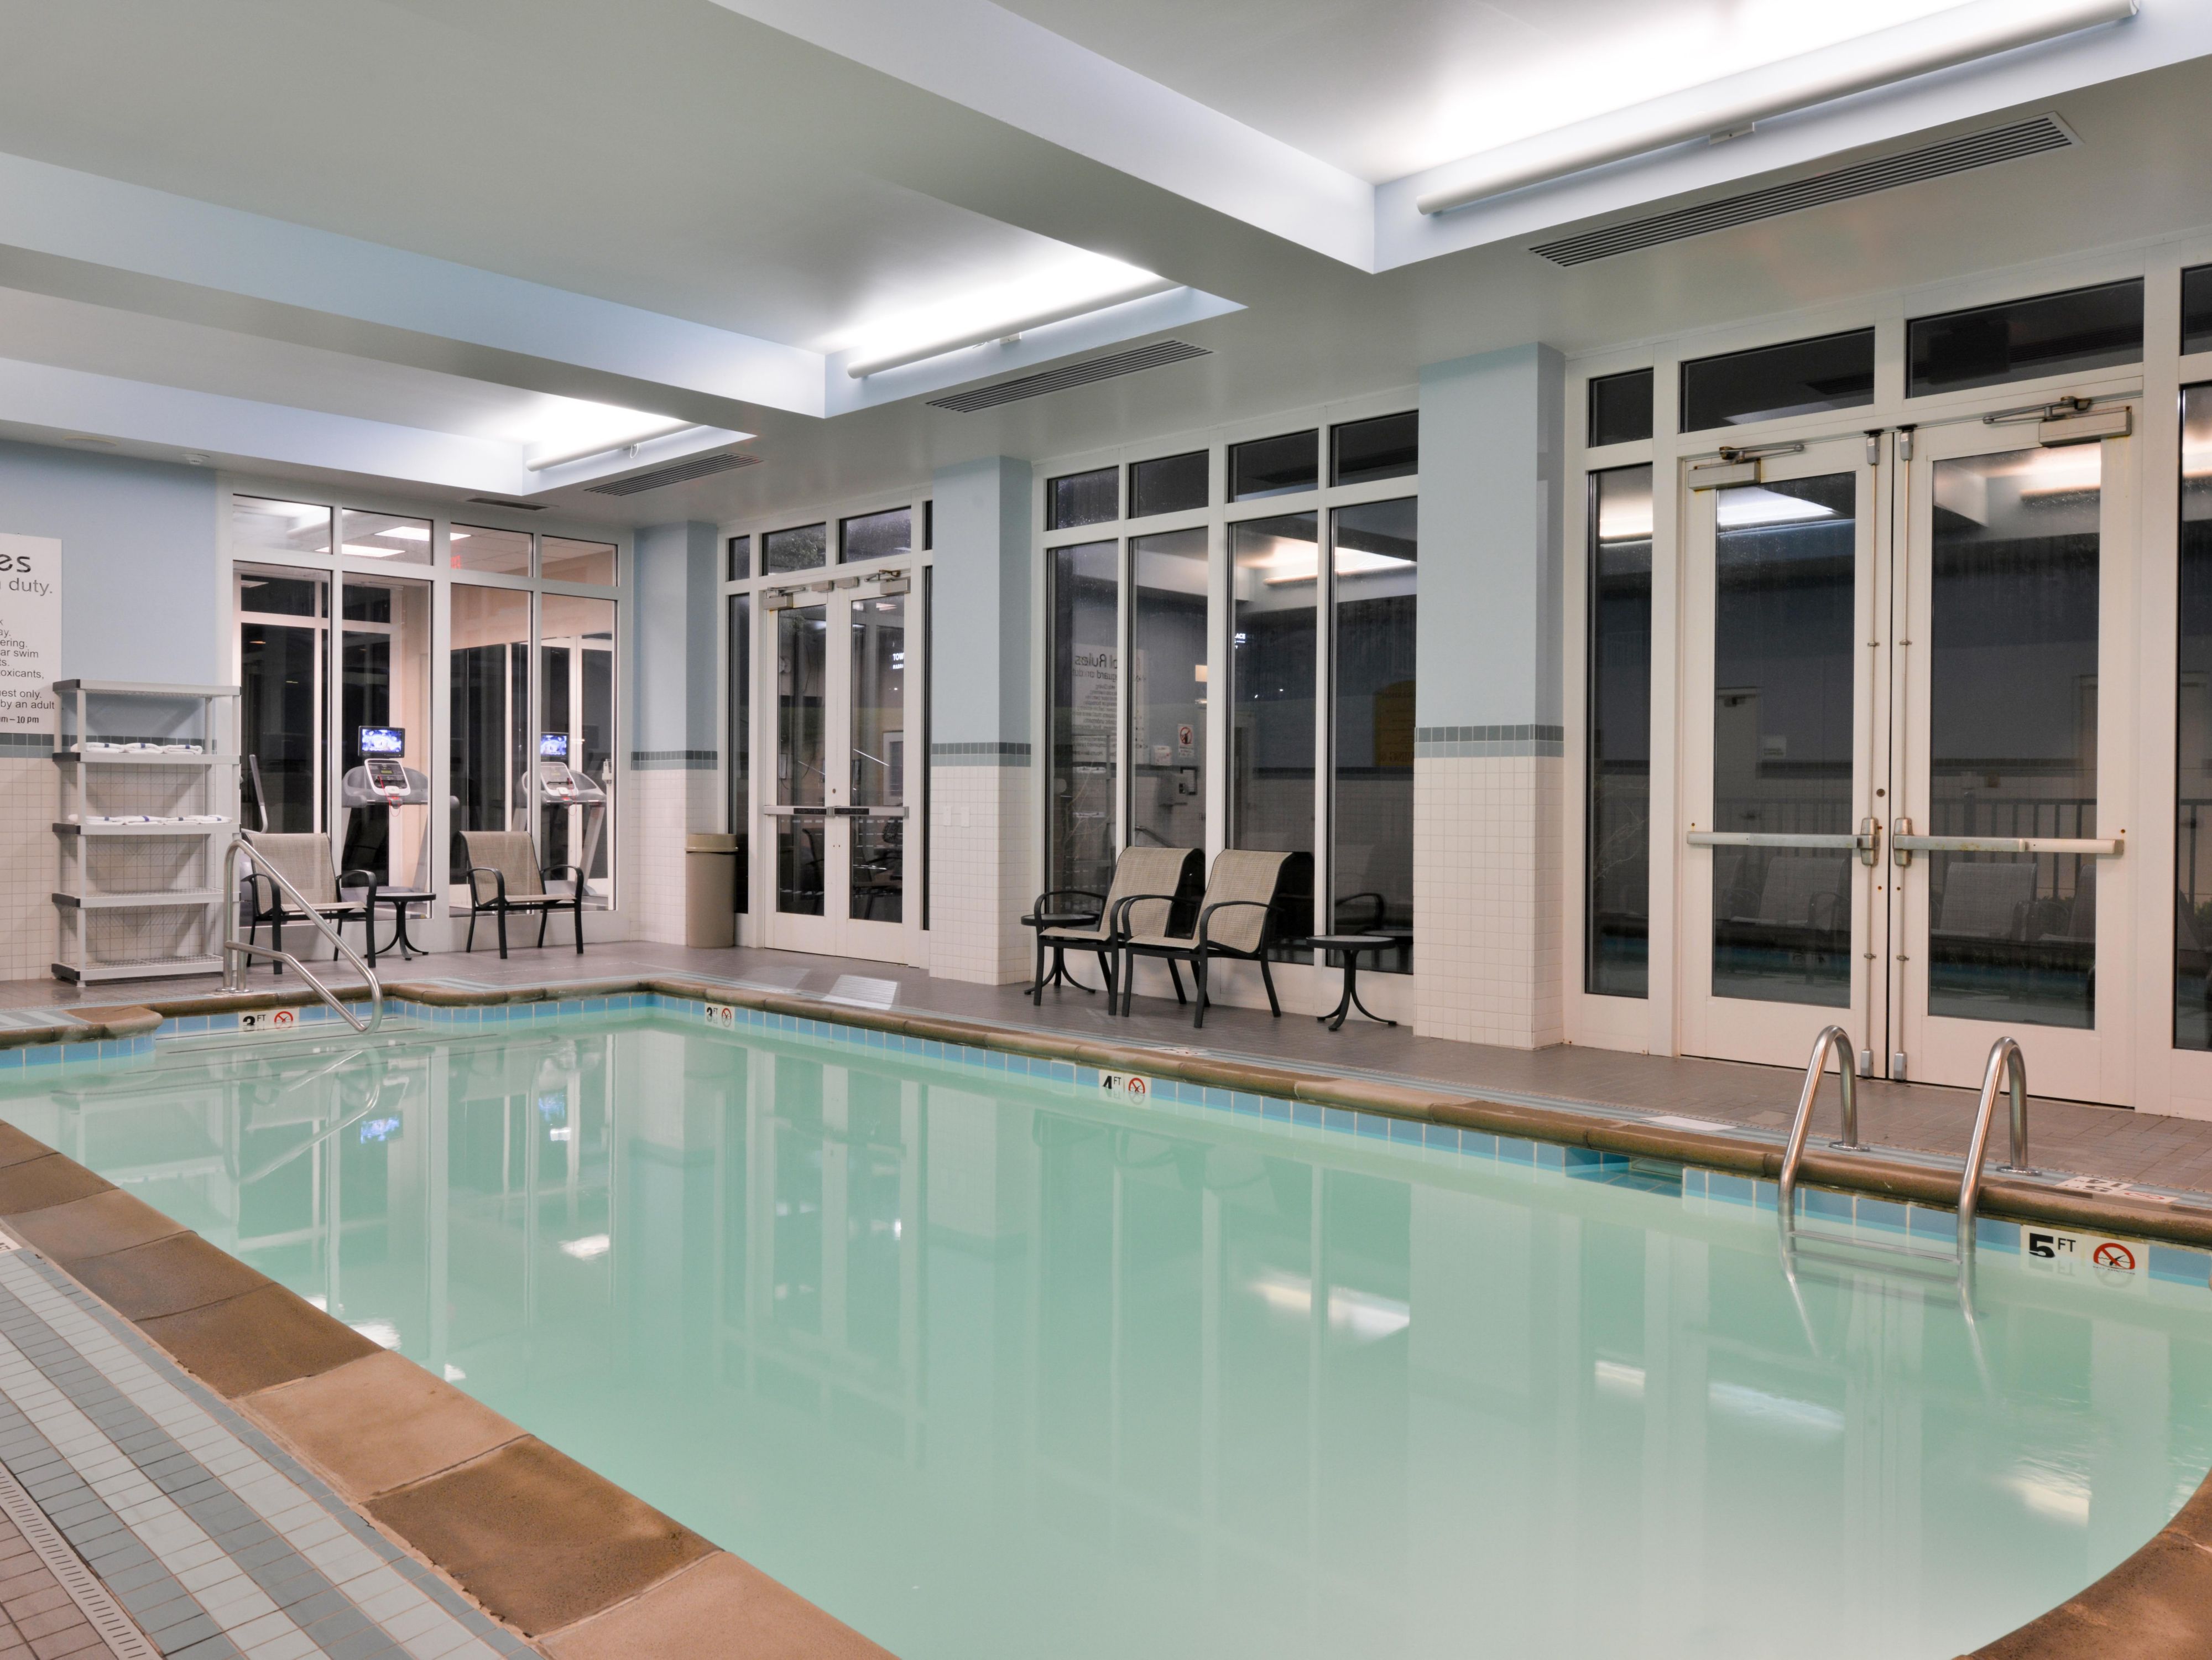 No matter the weather, our heated indoor pool is open! A great way to relax after a long flight, day of shopping, or playing with the kids. 